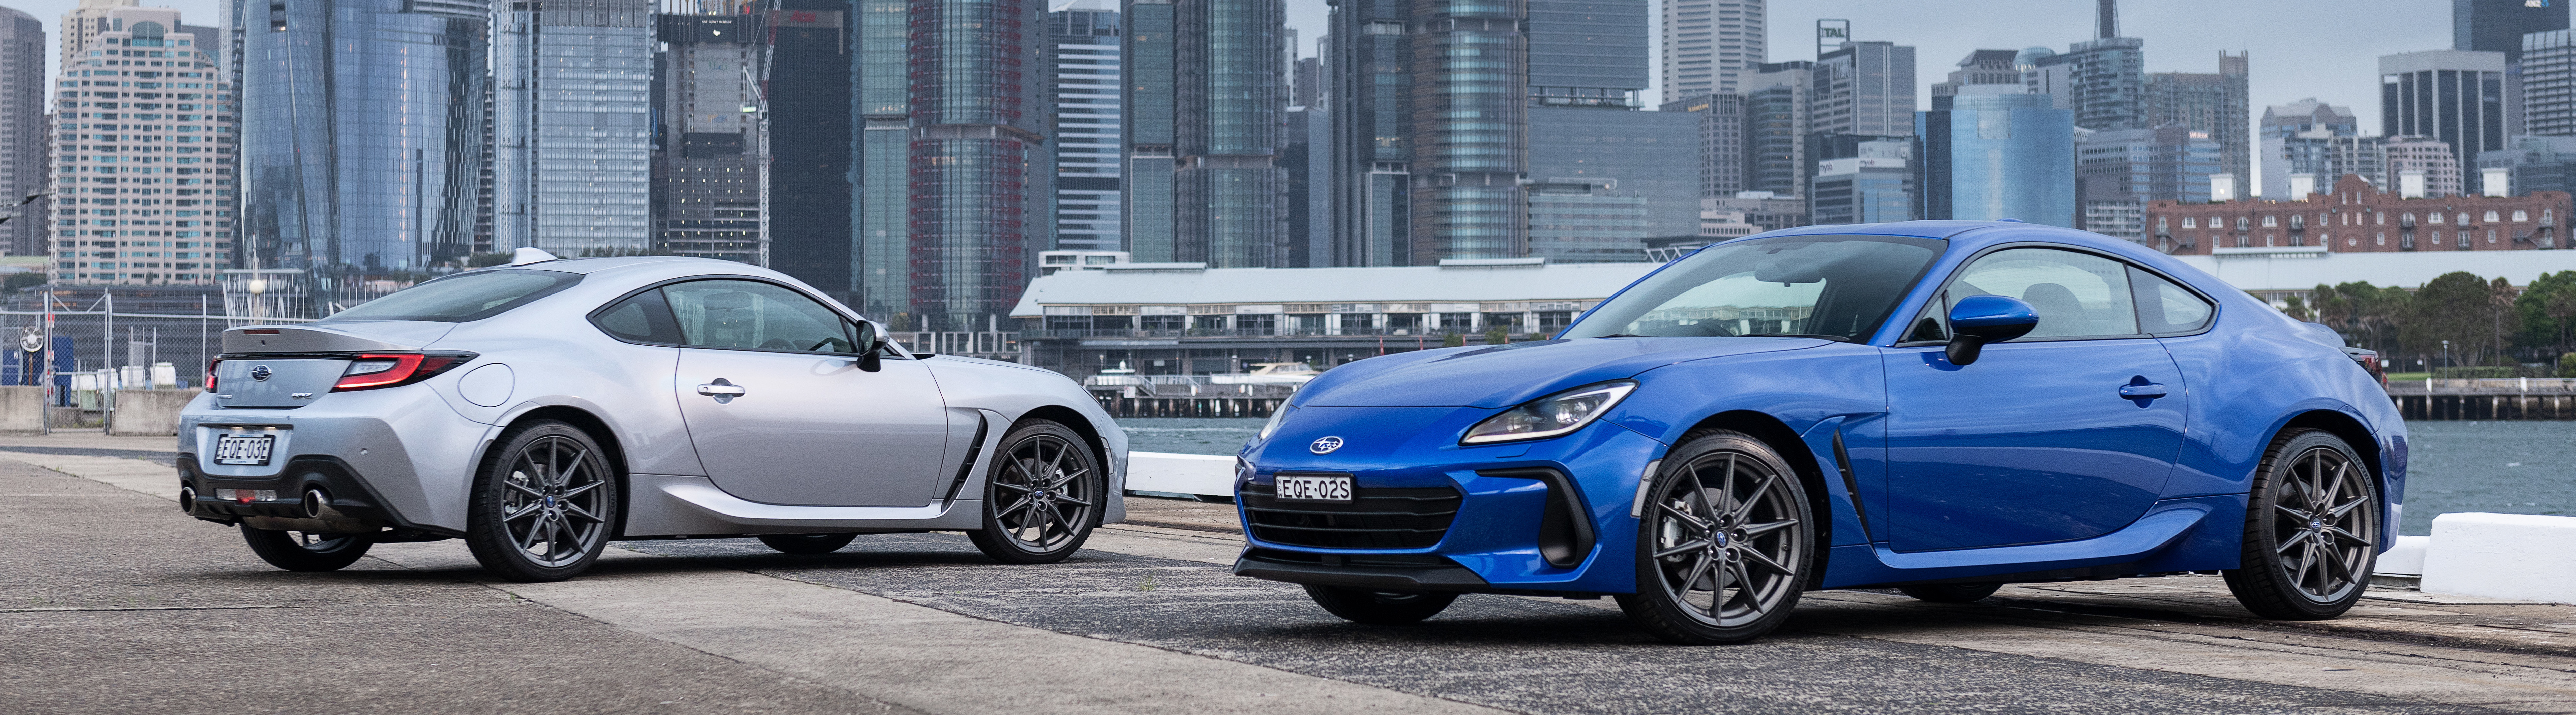 Redesigned and re-engineered: Iconic Subaru BRZ delivers next level exhilaration with new generation 